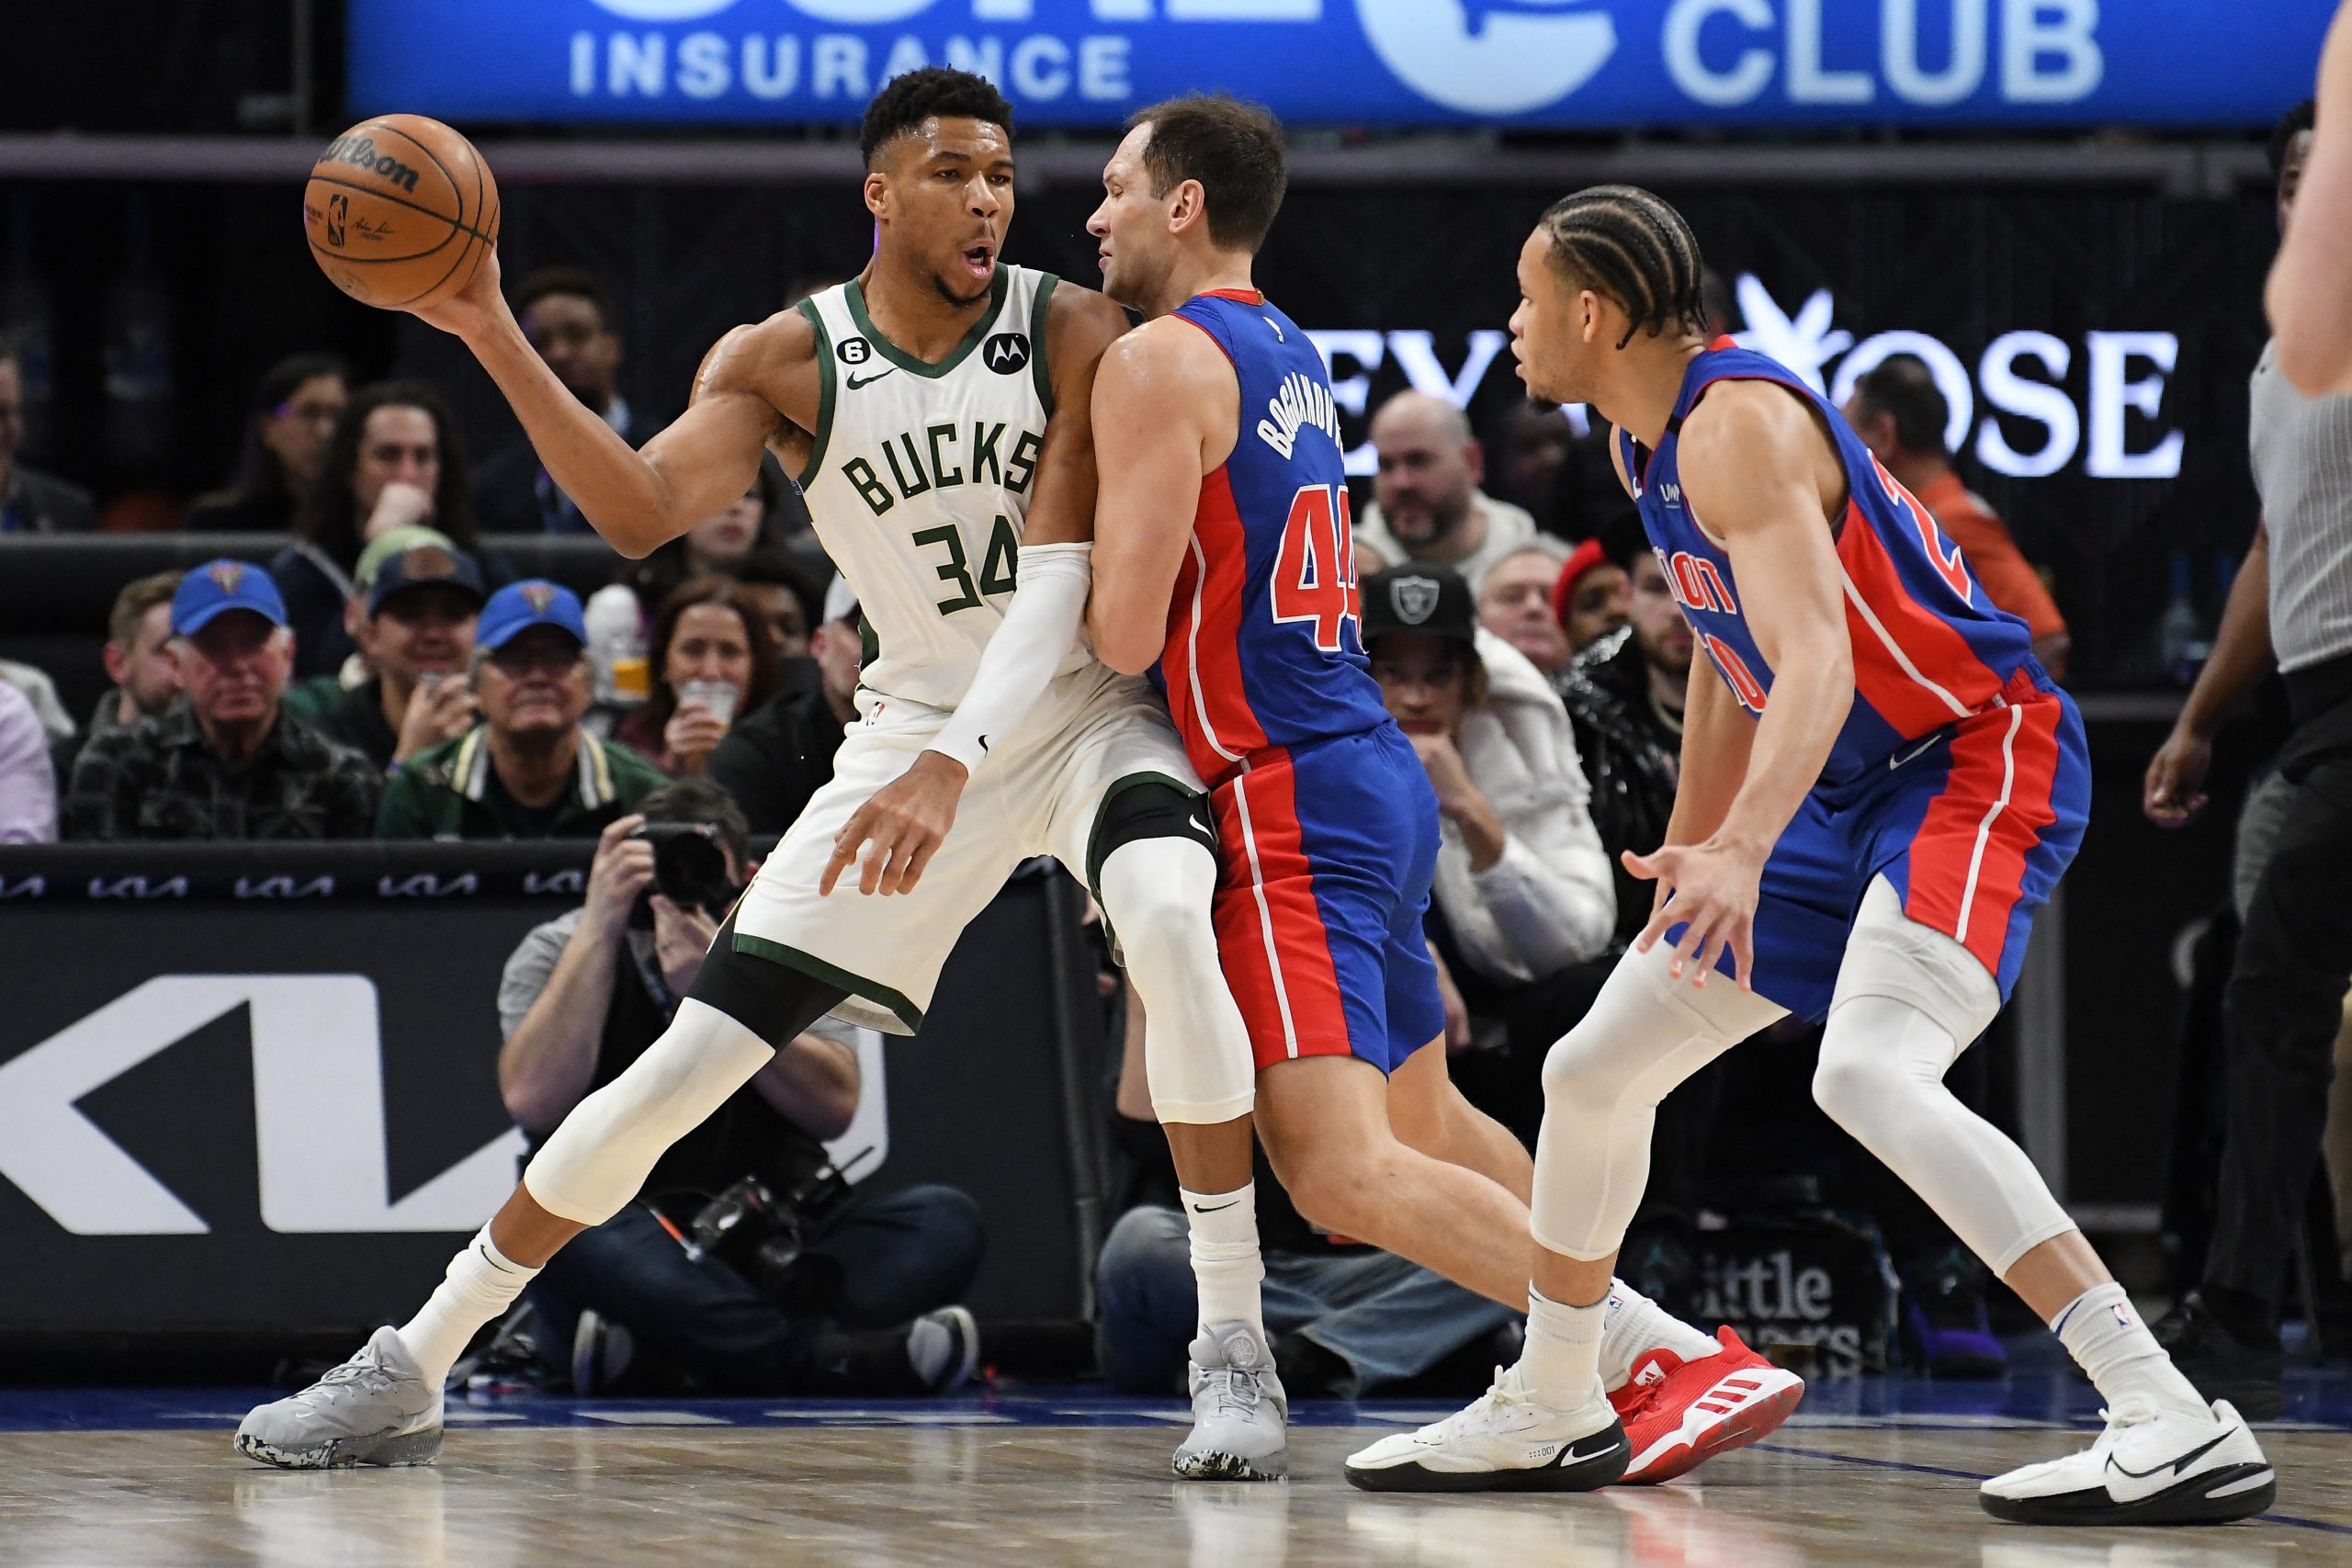 Jan 23, 2023; Detroit, Michigan, USA; Milwaukee Bucks forward Giannis Antetokounmpo (34) looks to pass the ball while being pressured by Detroit Pistons forward Bojan Bogdanovic (44) in the first quarter at Little Caesars Arena. Mandatory Credit: Lon Horwedel-USA TODAY Sports Photo: Lon Horwedel/REUTERS